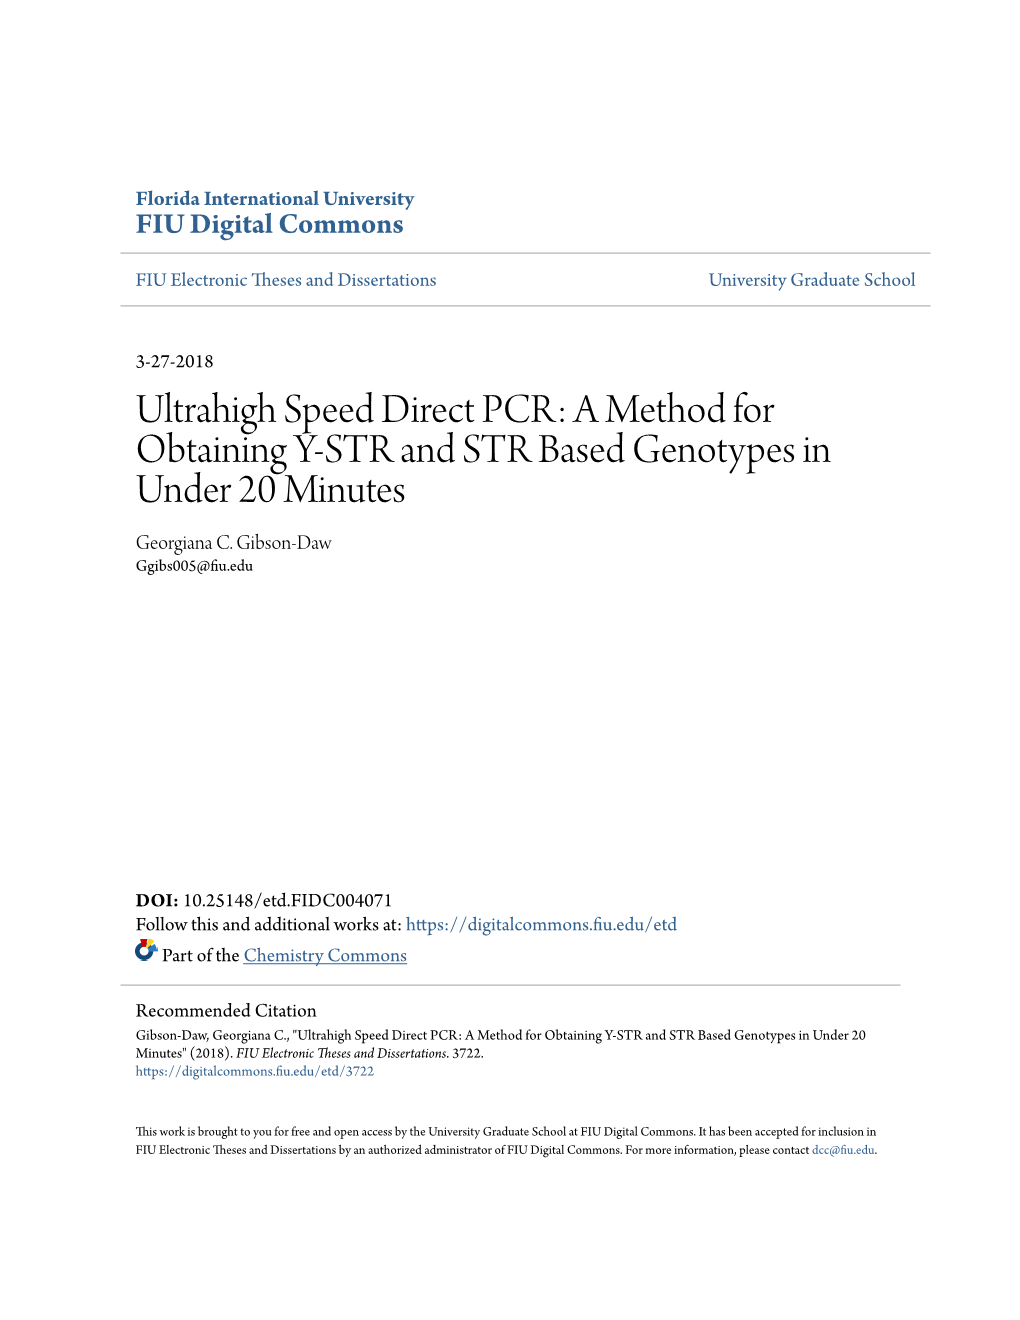 Ultrahigh Speed Direct PCR: a Method for Obtaining Y-STR and STR Based Genotypes in Under 20 Minutes Georgiana C